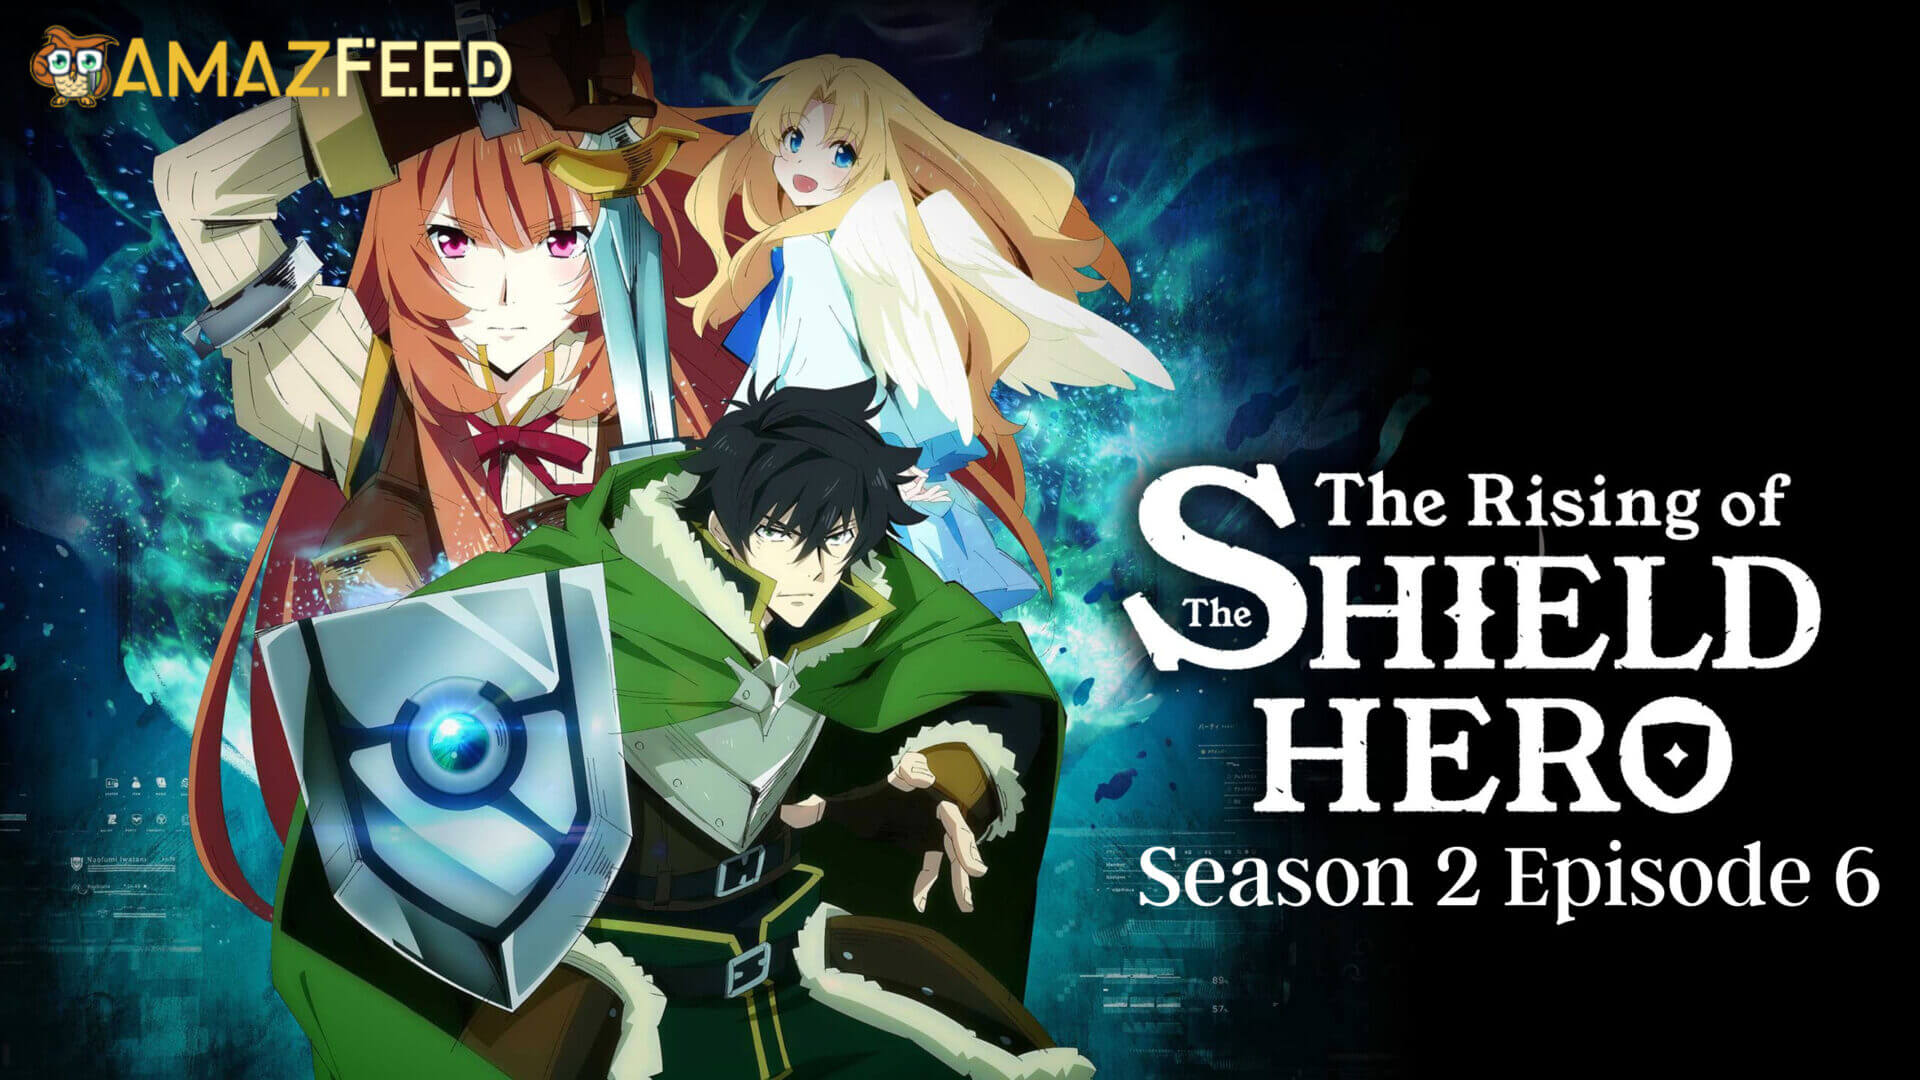 The Rising Of The Shield Hero Season 2 Episode 6 ⇒ Release Date, Spoilers,  Recap, Cast & News Updates » Amazfeed